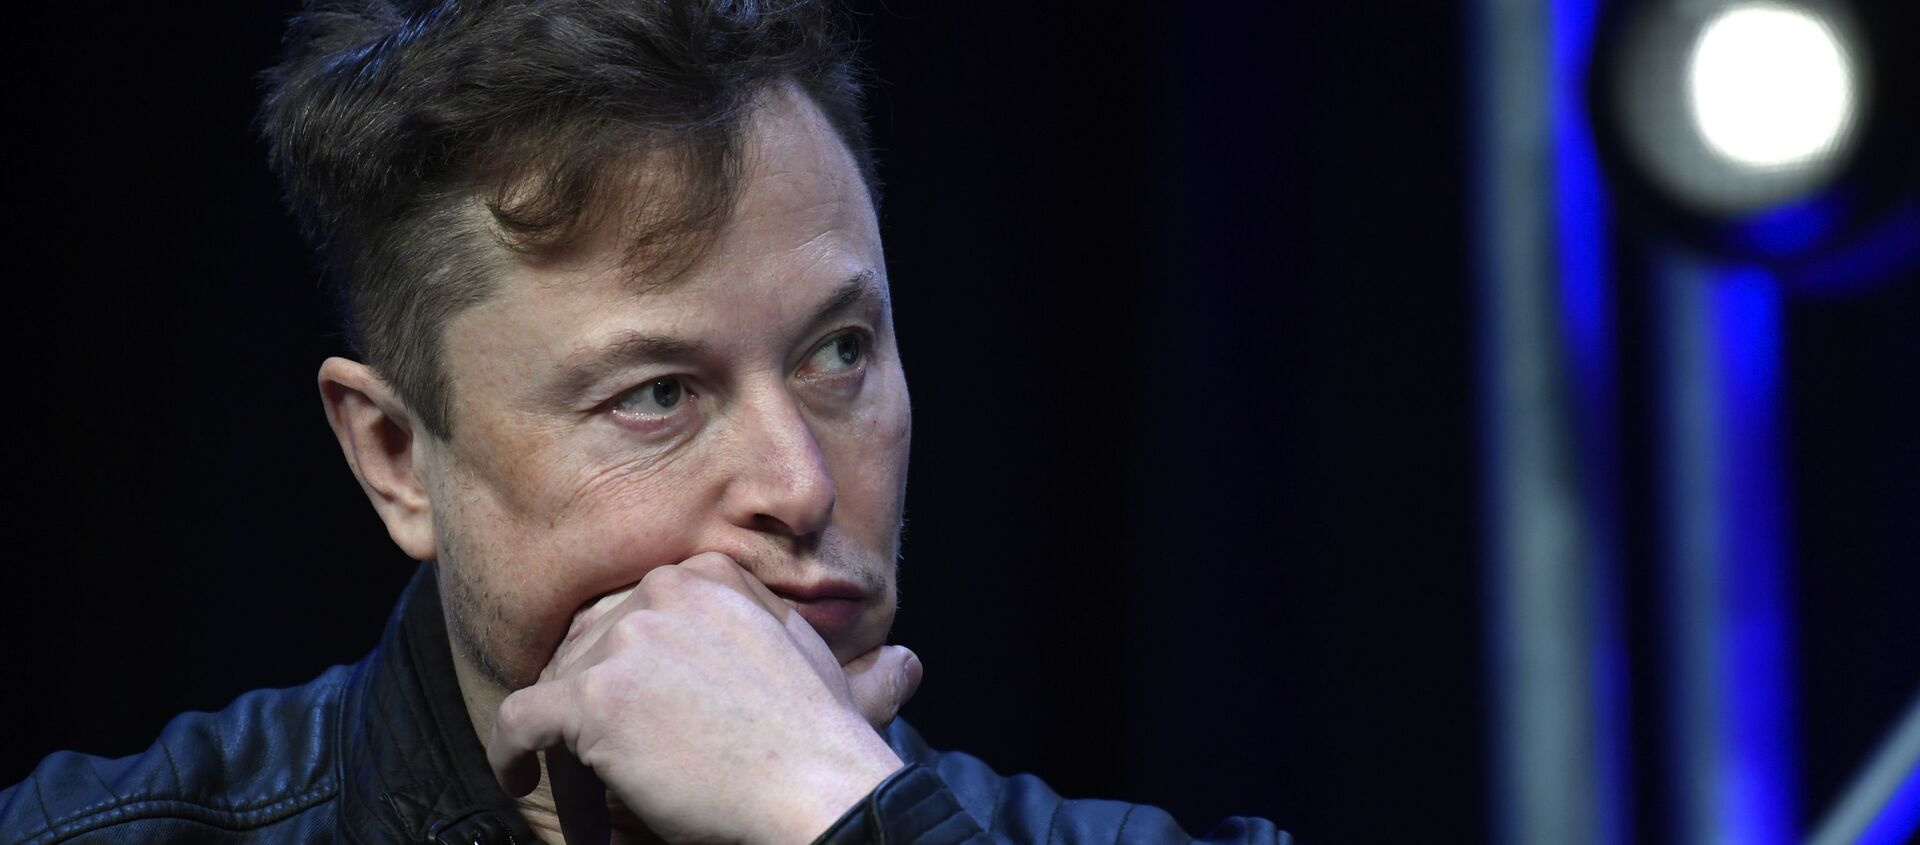 Tesla and SpaceX Chief Executive Officer Elon Musk listens to a question as he speaks at the SATELLITE Conference and Exhibition in Washington, Monday, March 9, 2020 - Sputnik International, 1920, 24.04.2021